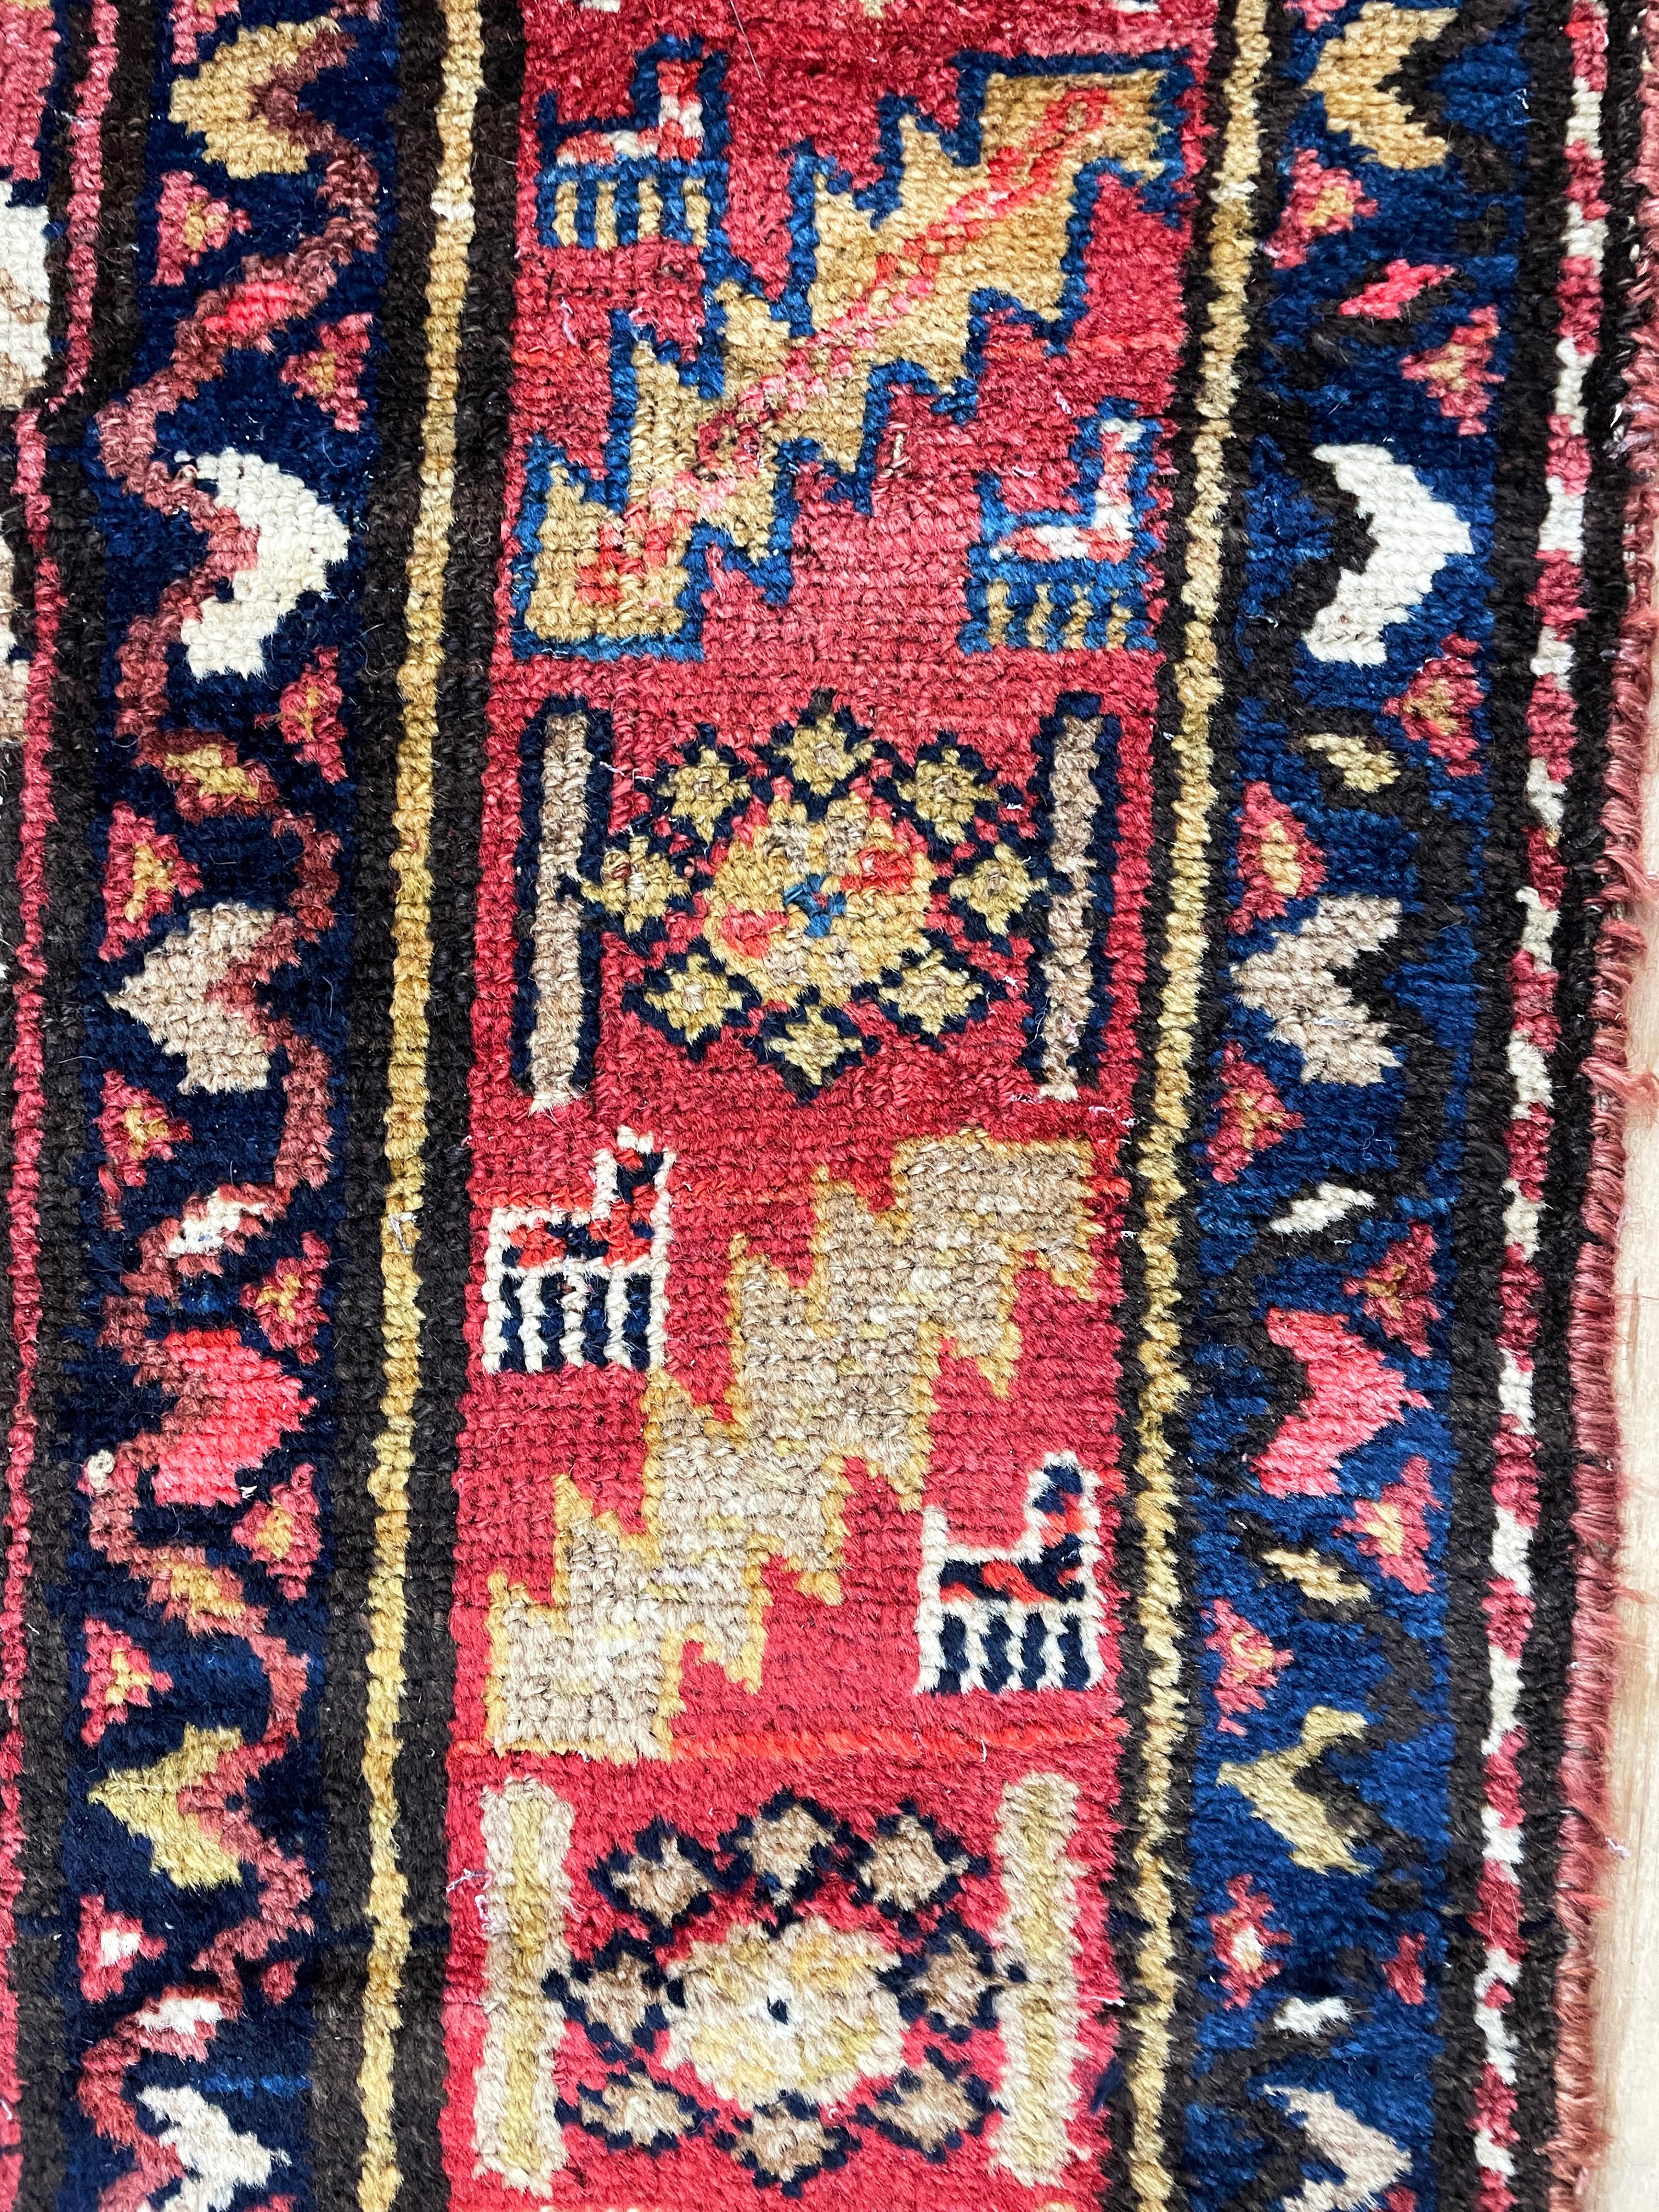 Discover the timeless allure of this exquisite antique Northwest Persian Serab/Serapi runner! Measuring at 4'1